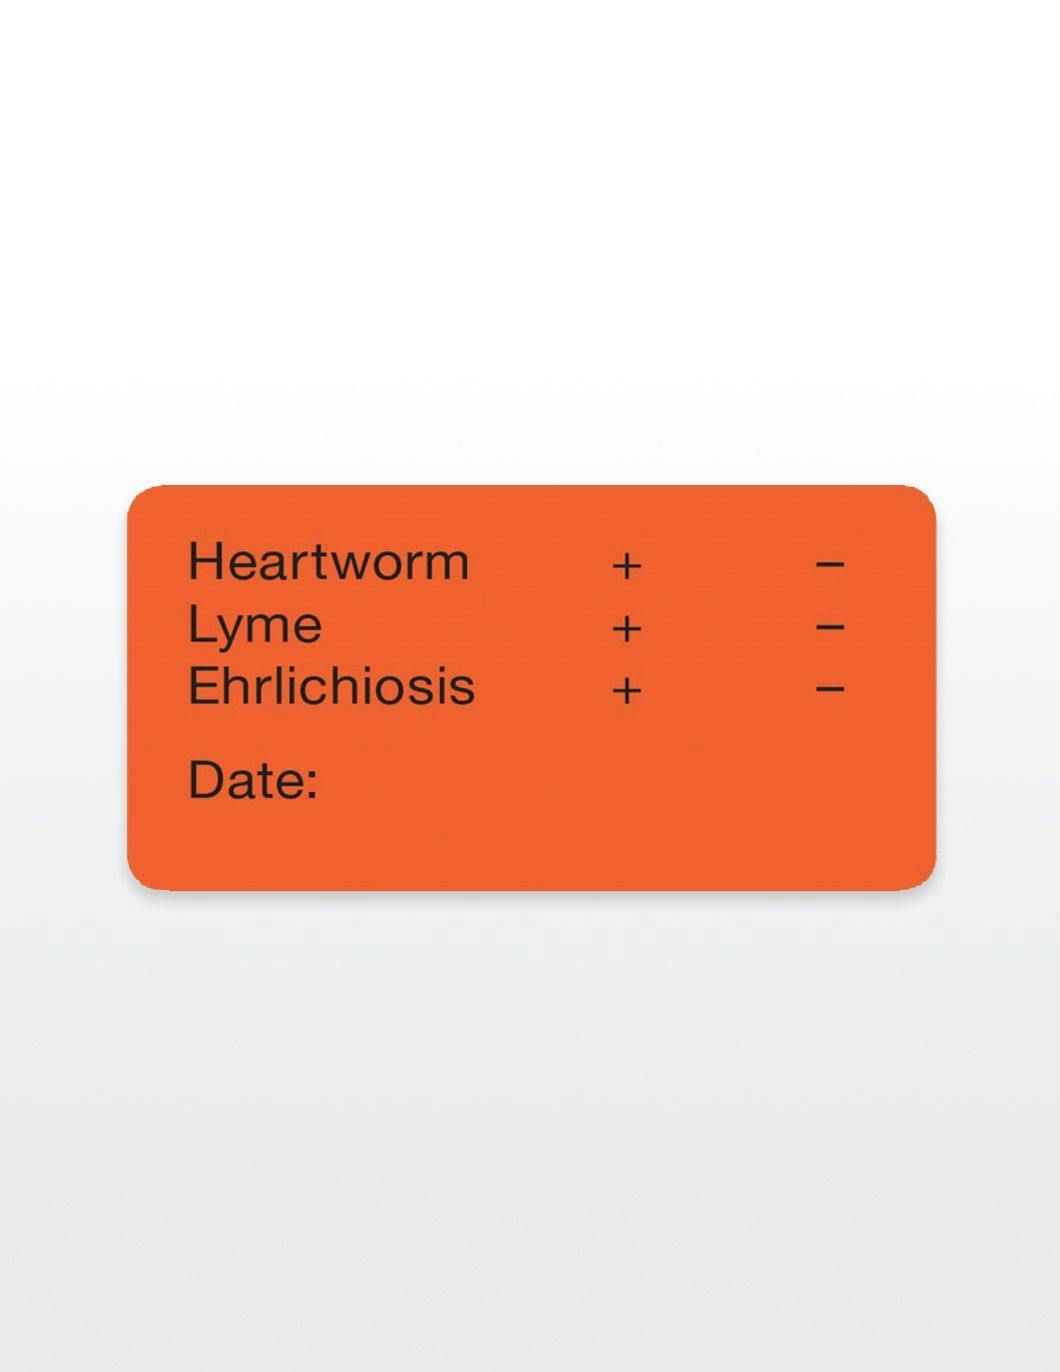 heartworm-medical-record-stickers